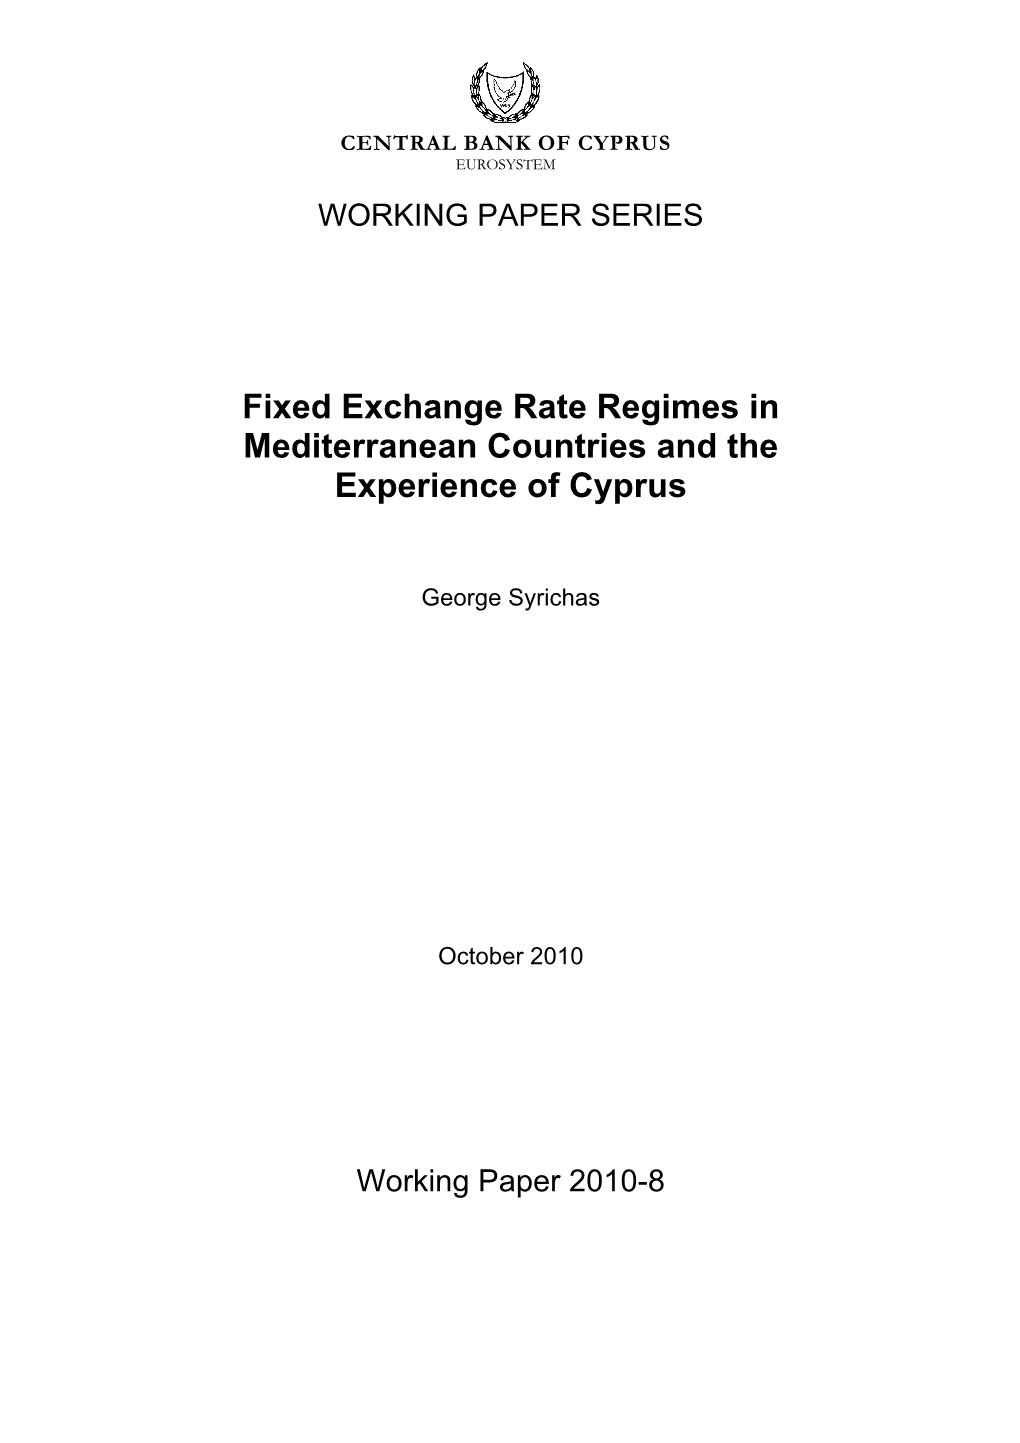 Fixed Exchange Rate Regimes in Mediterranean Countries and the Experience of Cyprus